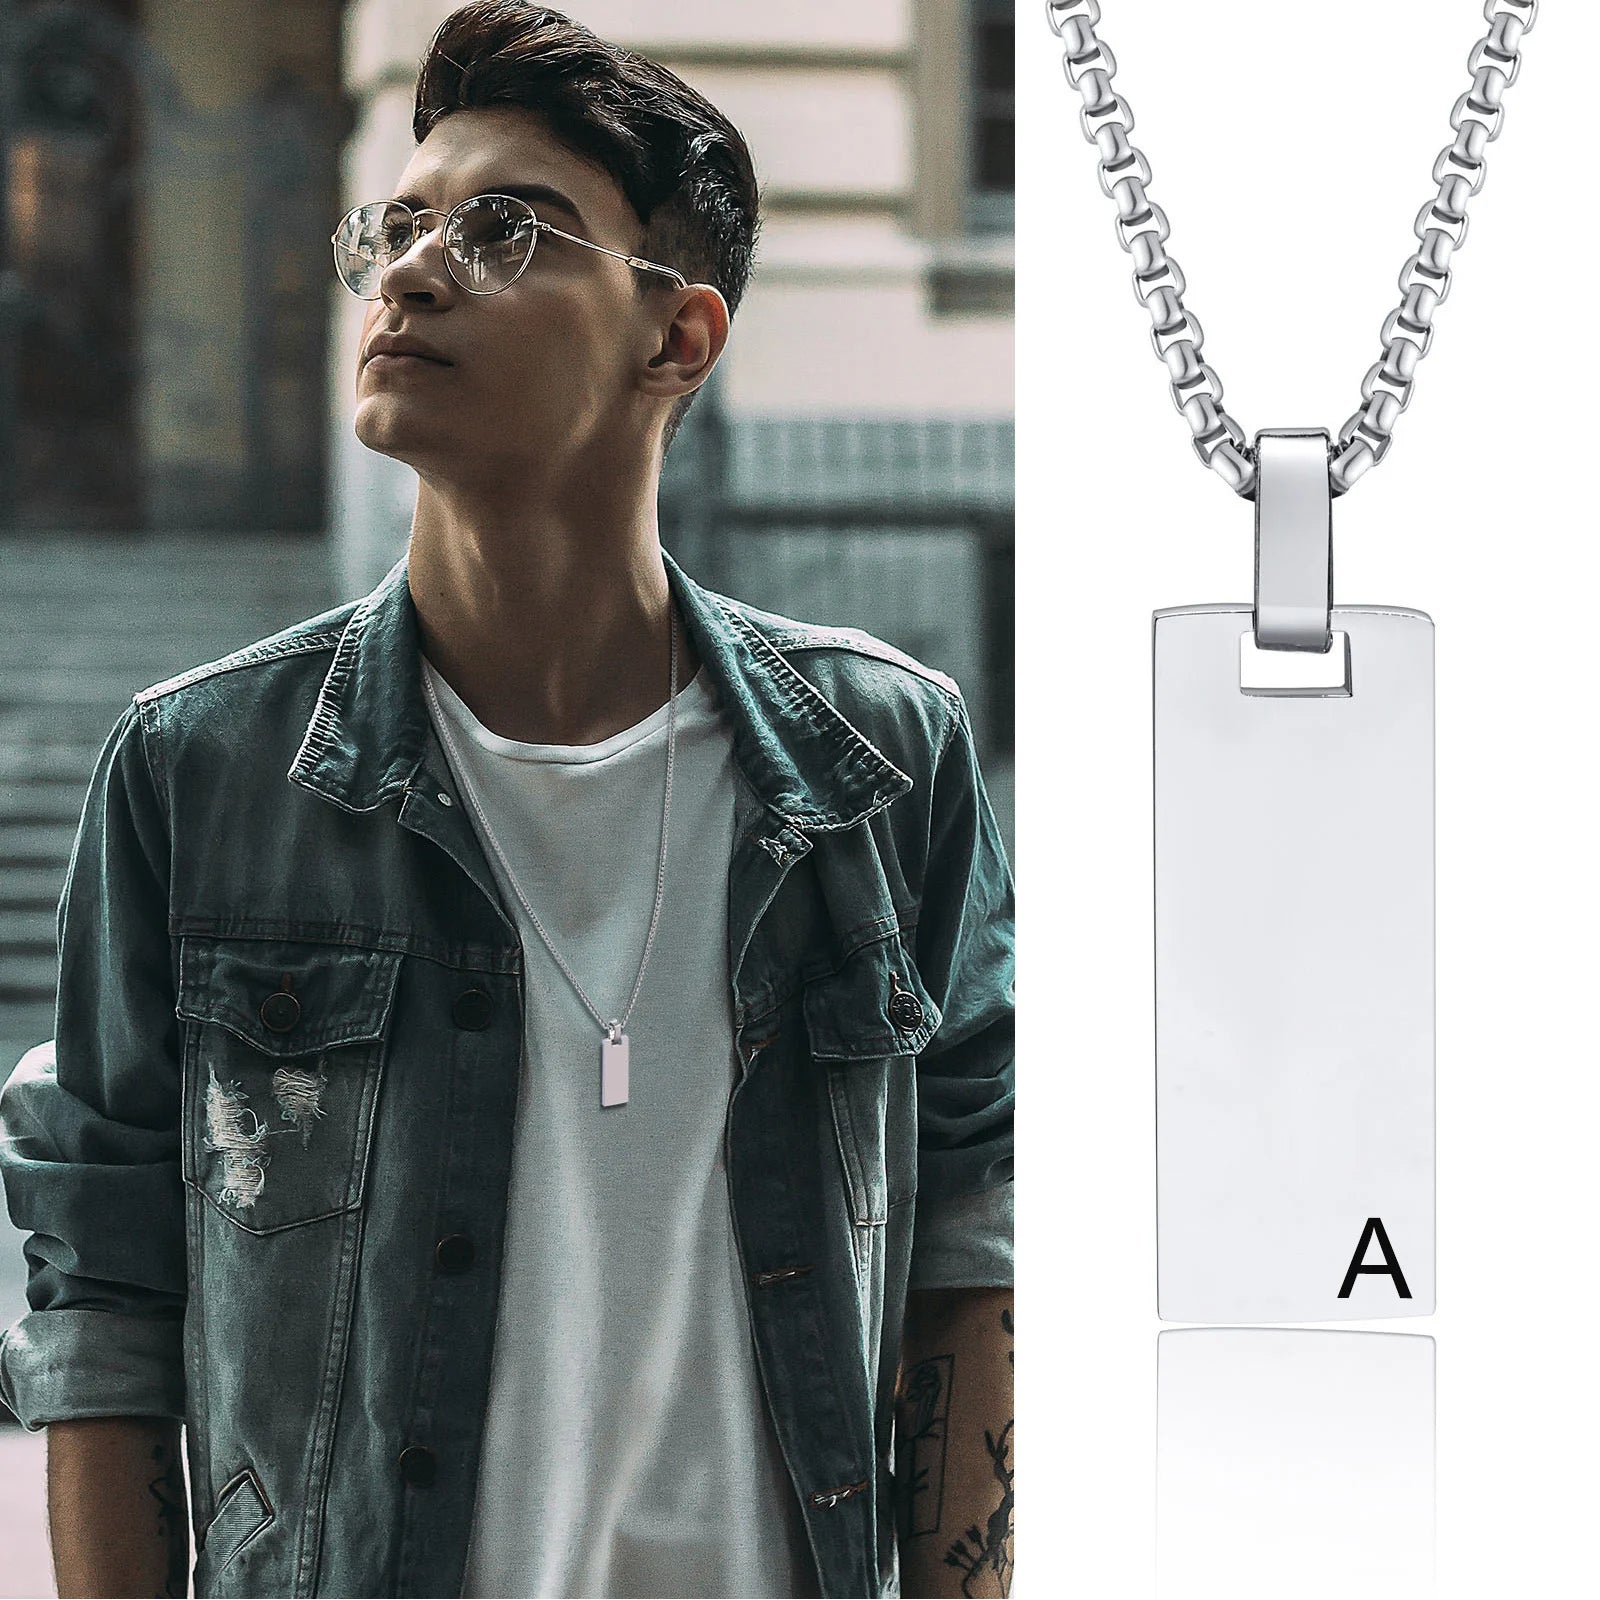 Men's Initial Vertical Bar Necklaces, Waterproof Stainless Steel Plain Geometric Pendant Collar, Personalize Custom Gifts Jewelry